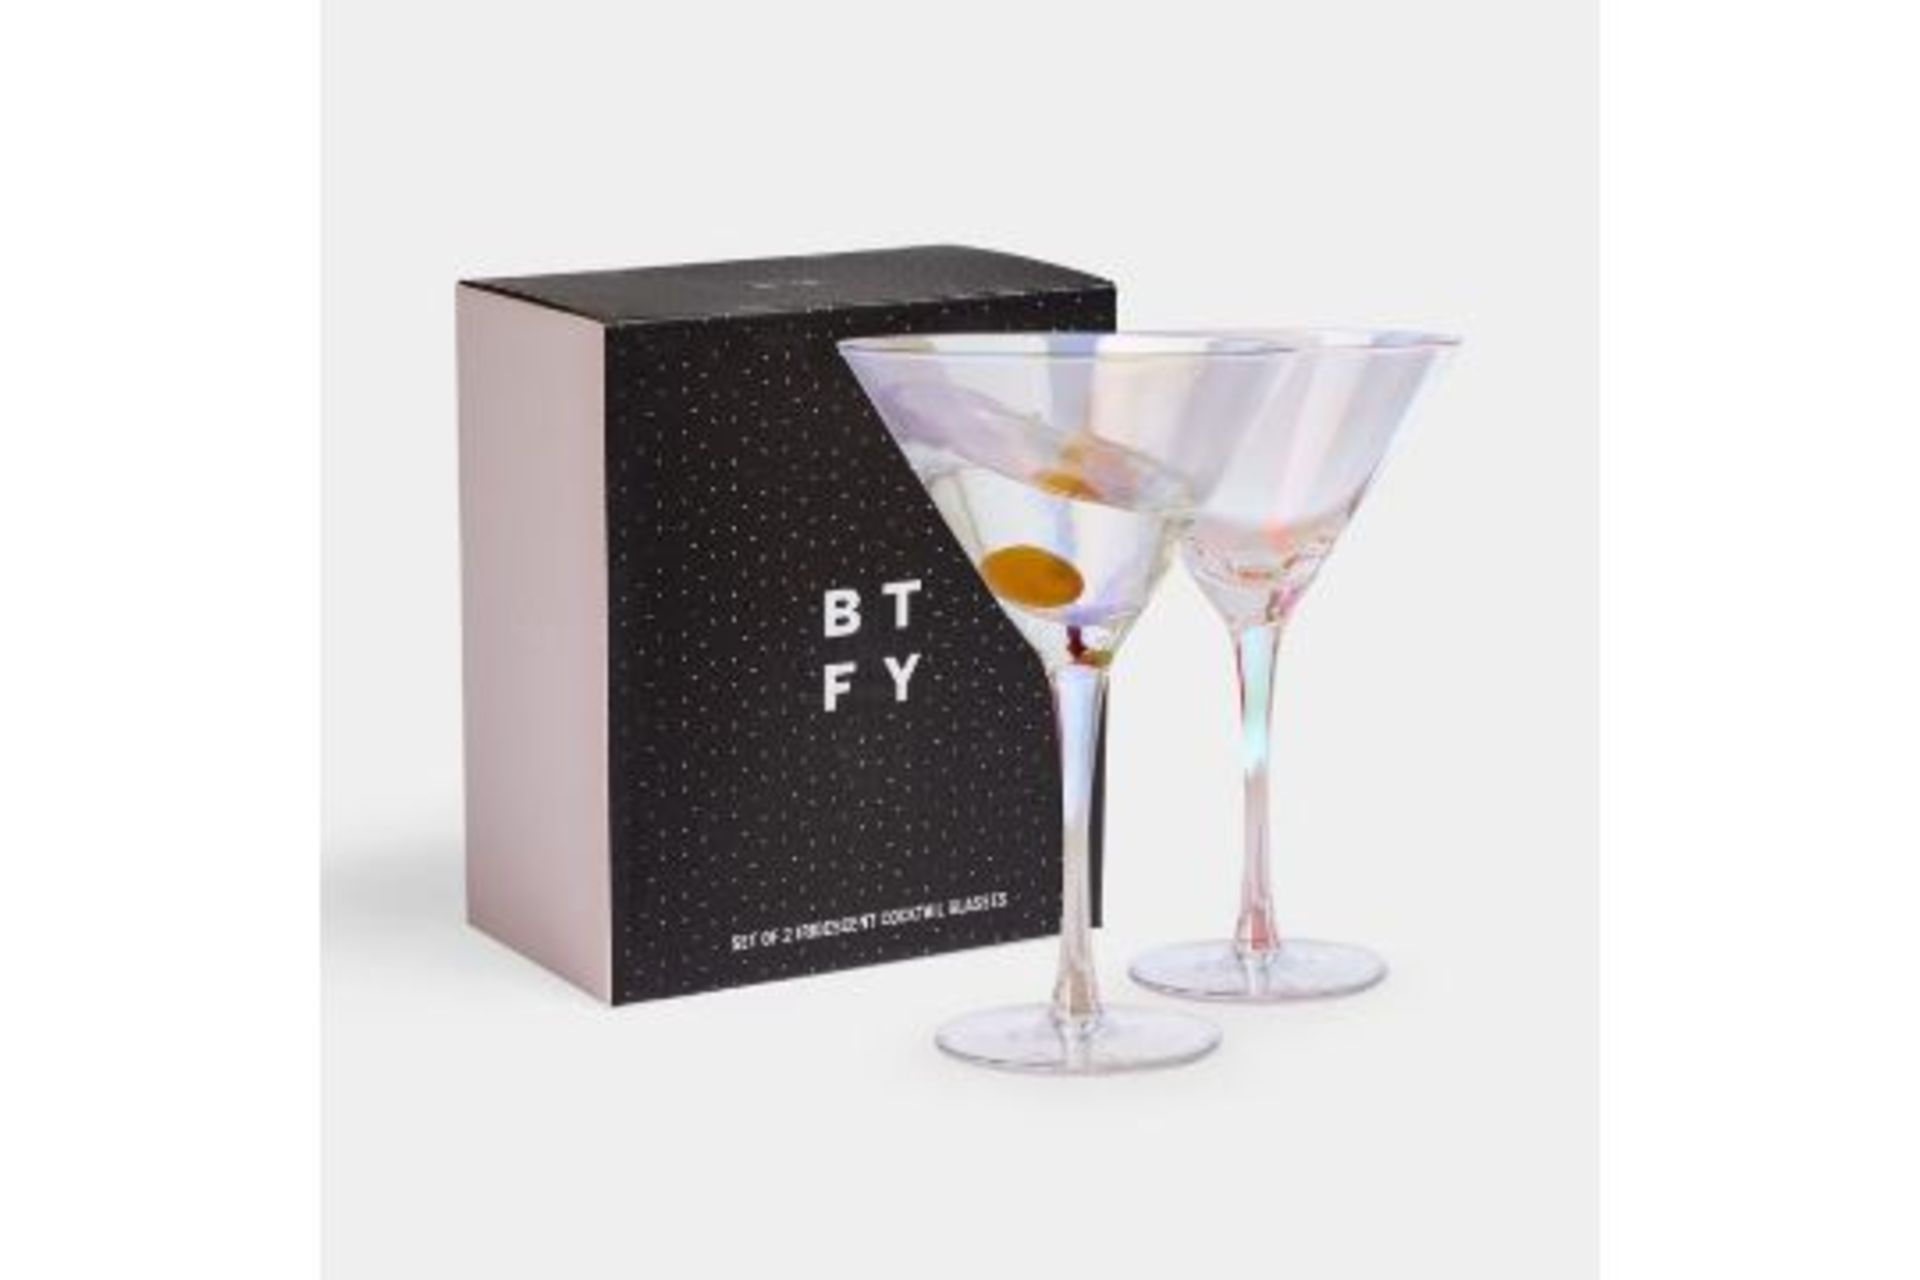 Set of 2 Iridescent Martini Glasses. - PW. Martini glasses are timeless, but we wanted to add a